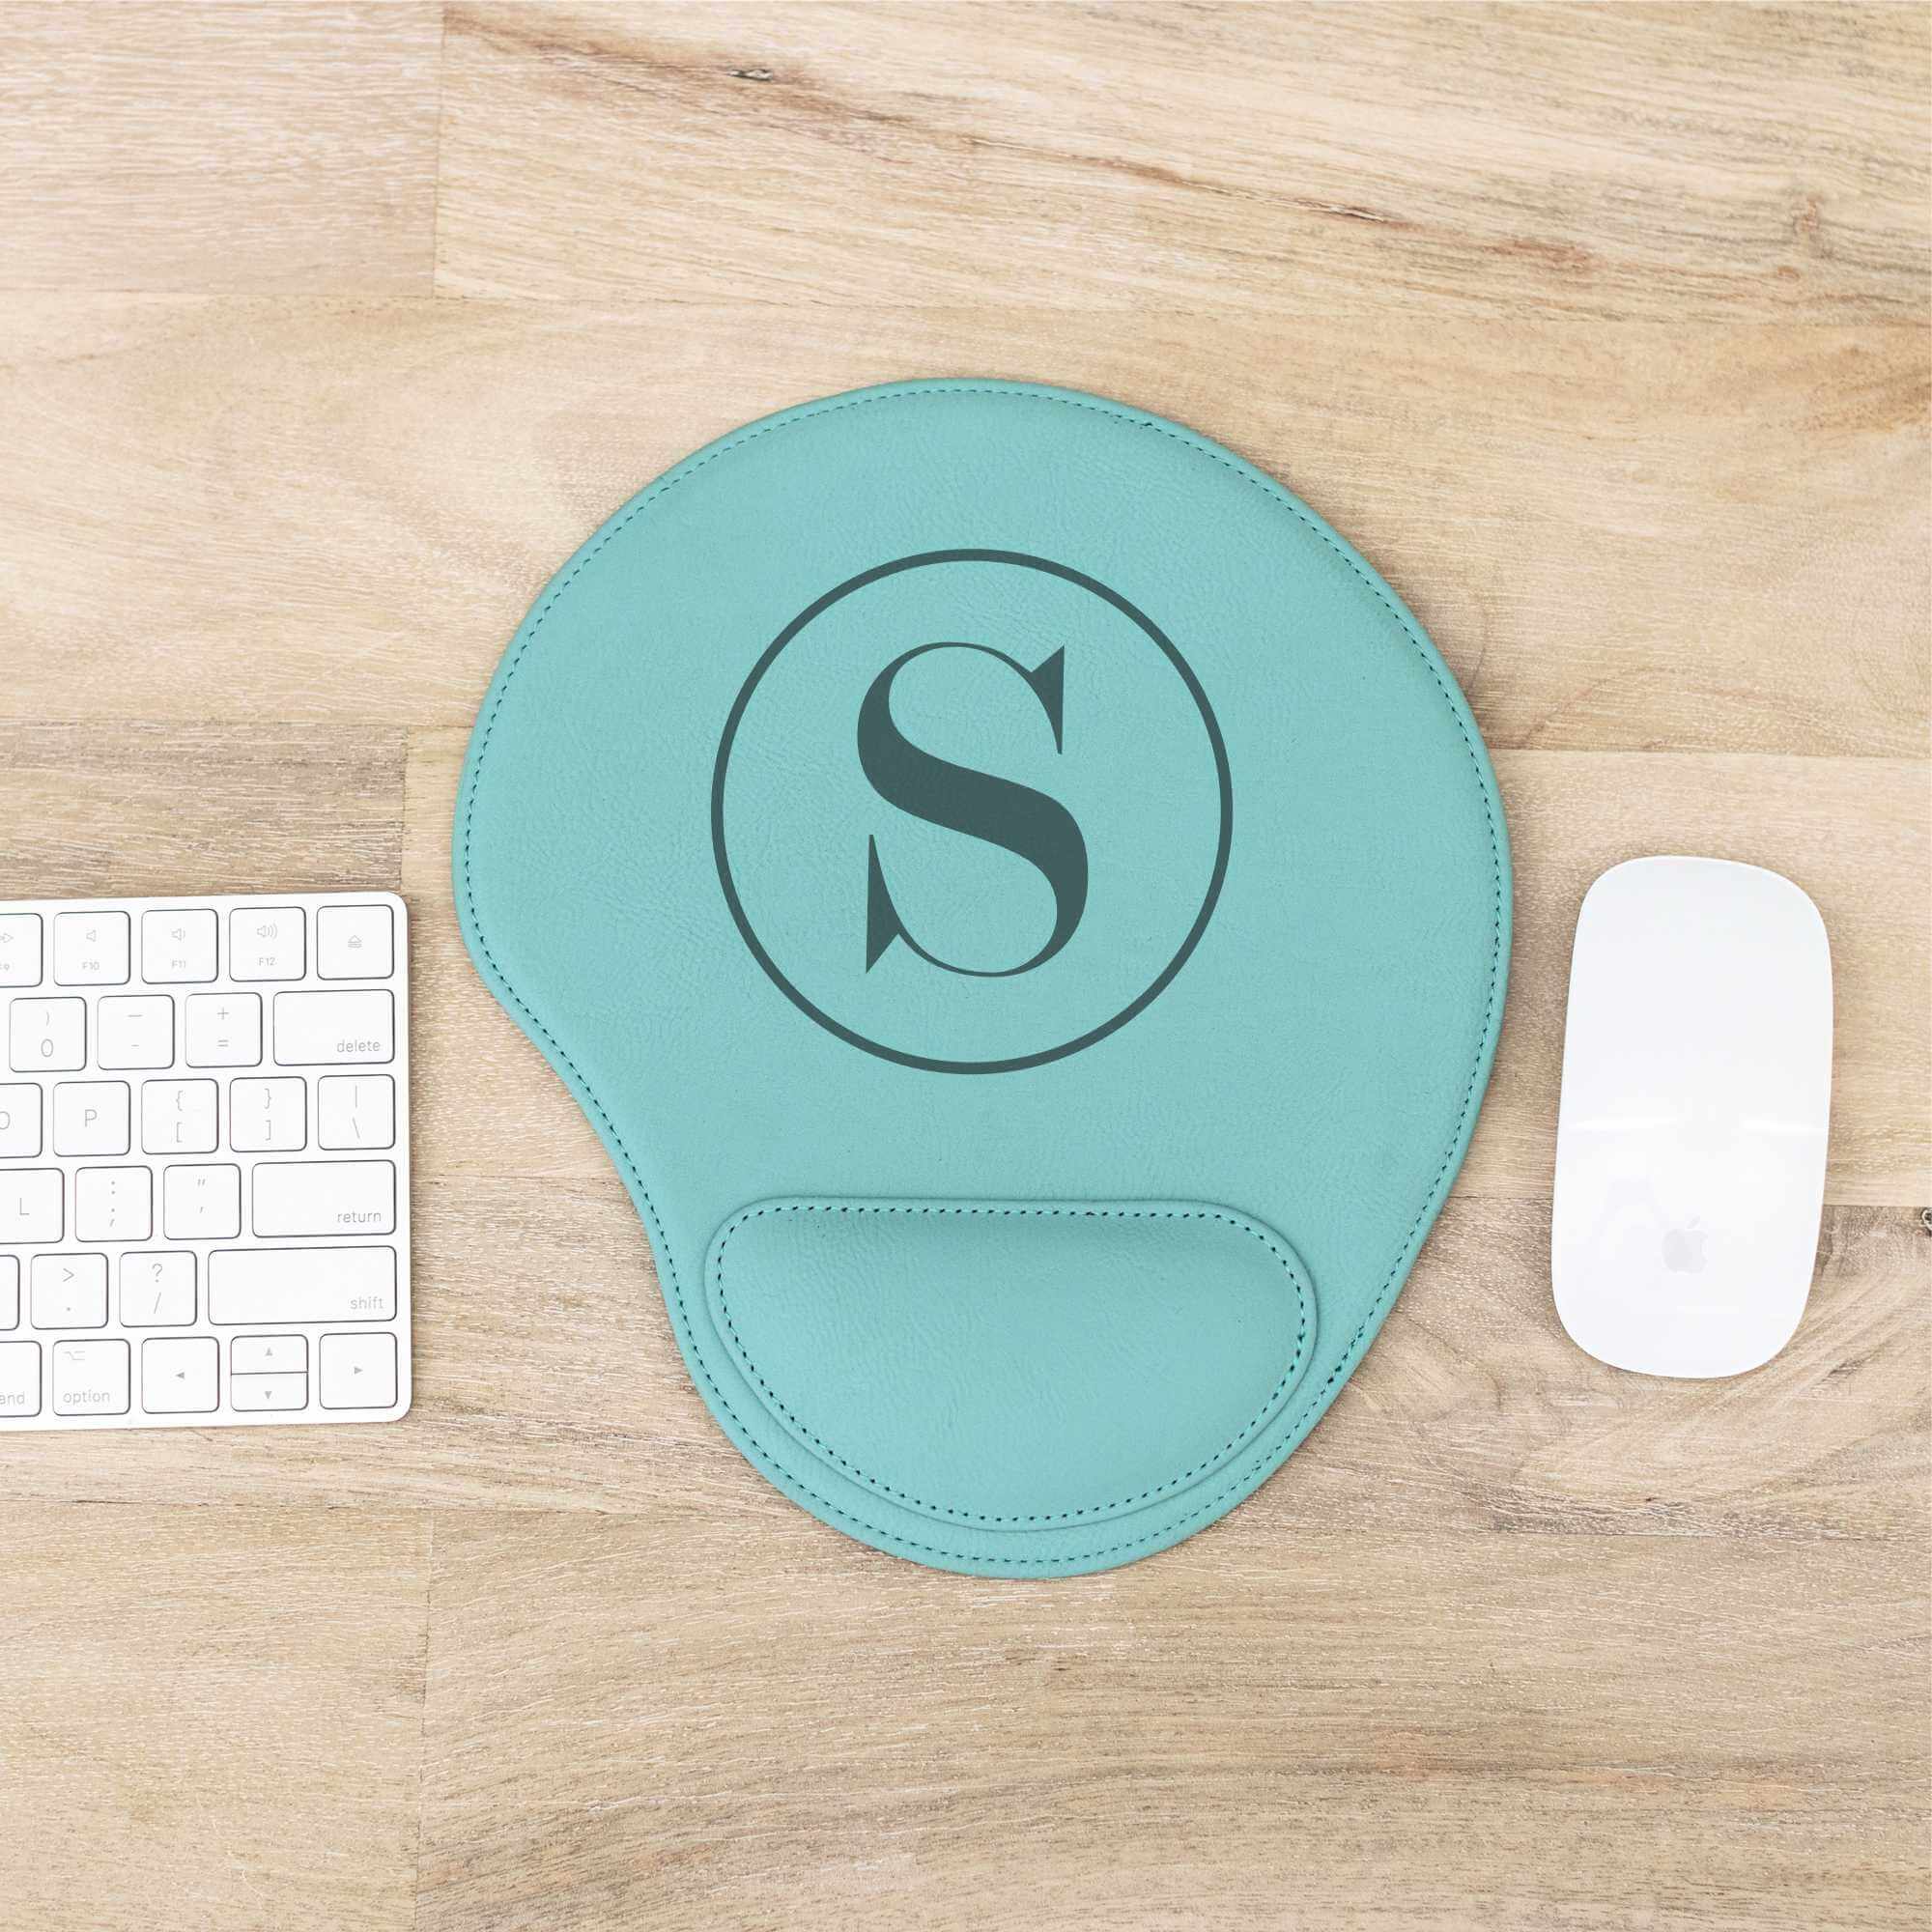 Vegan Leather Mouse Pad with Initial